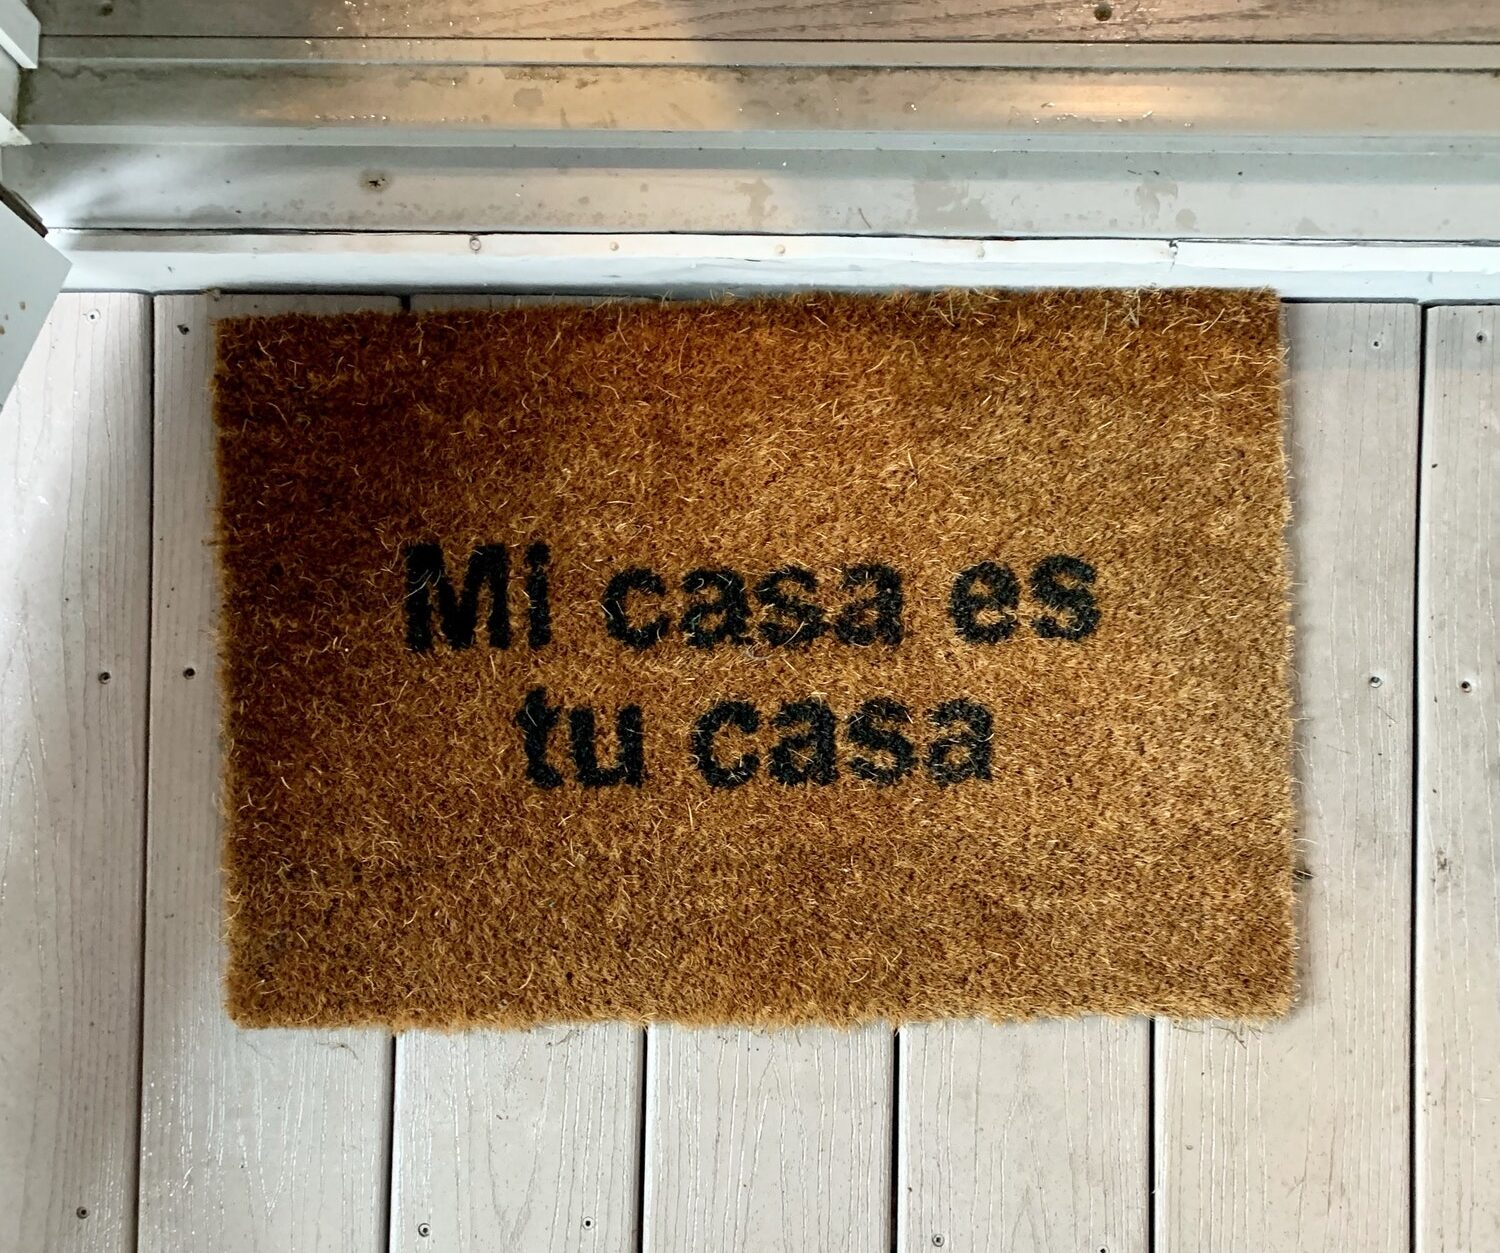 “Mi casa es tu casa” on an entrance door mat rug which means my house is your house in English